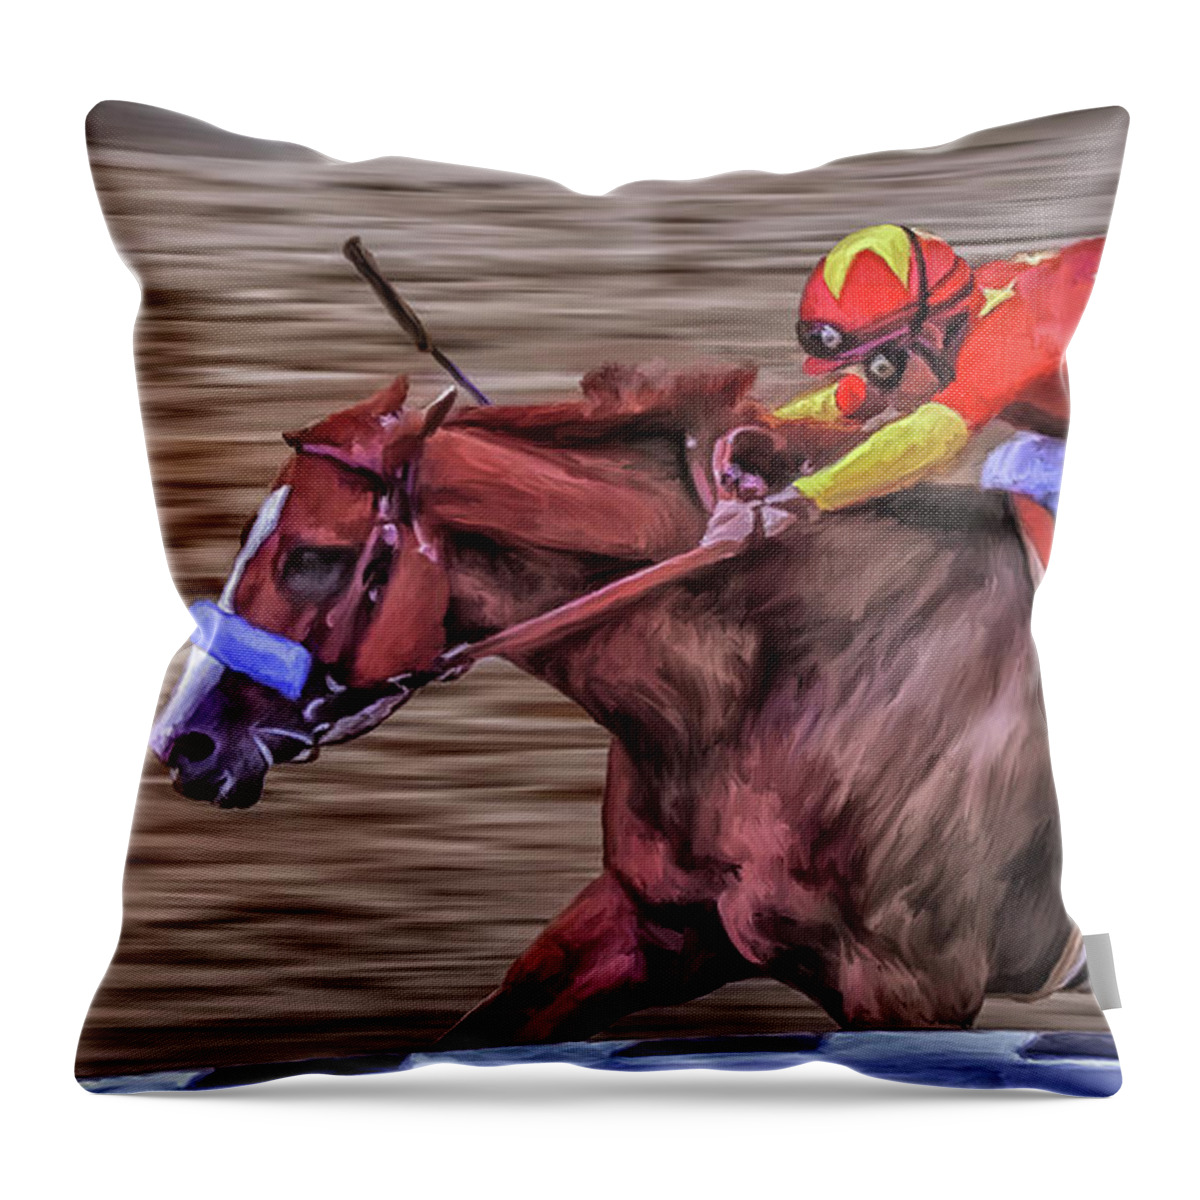 Justify Throw Pillow featuring the digital art Triple Crown Winner Justify by Rick Mosher